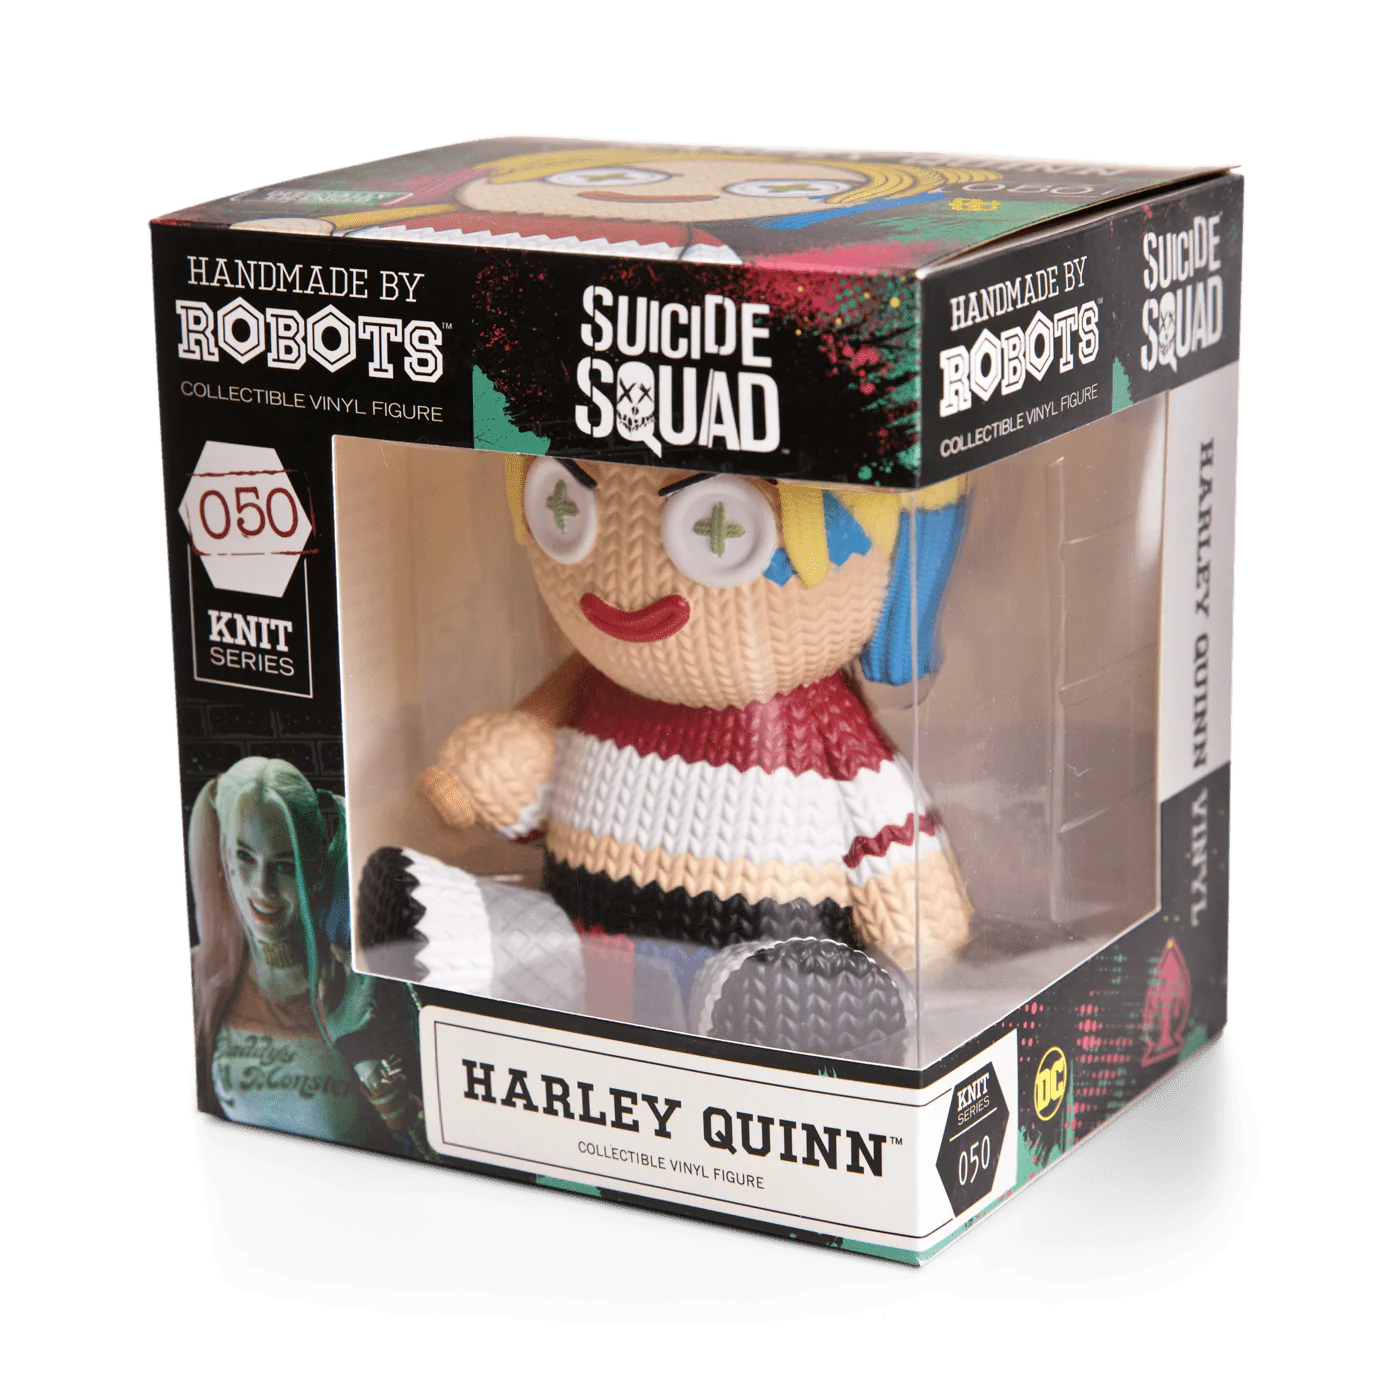 Handmade By Robots Suicide Squad - Harley Quinn #050 Knit Series